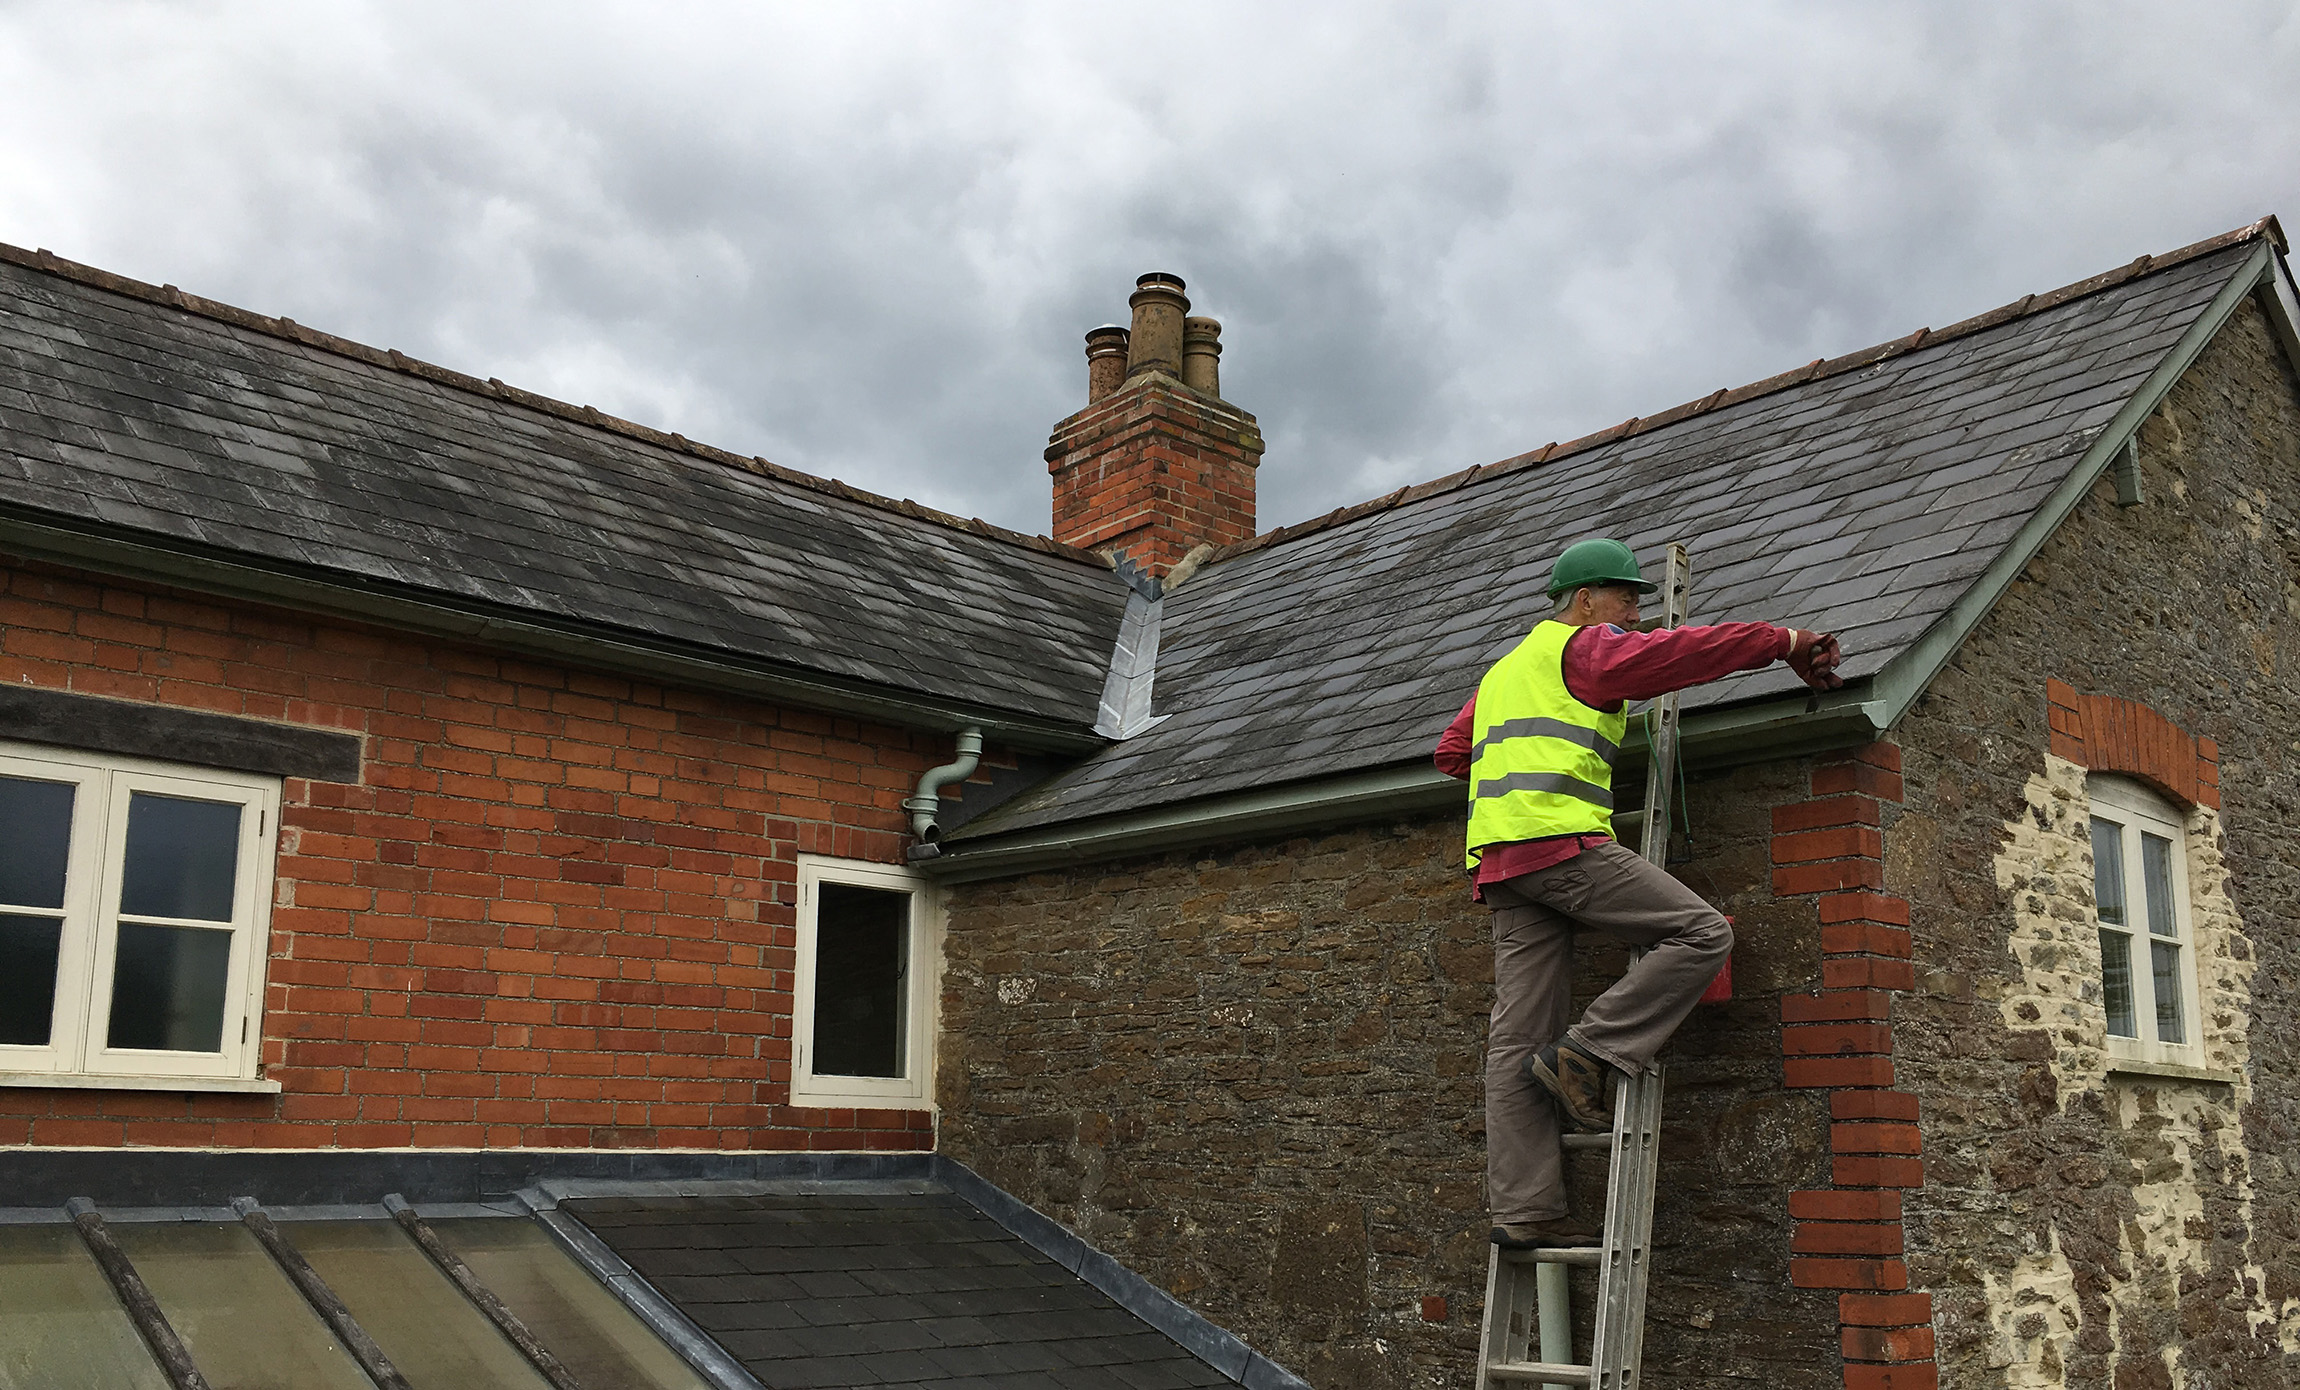 Cleaning out gutters on an old house in Dorset